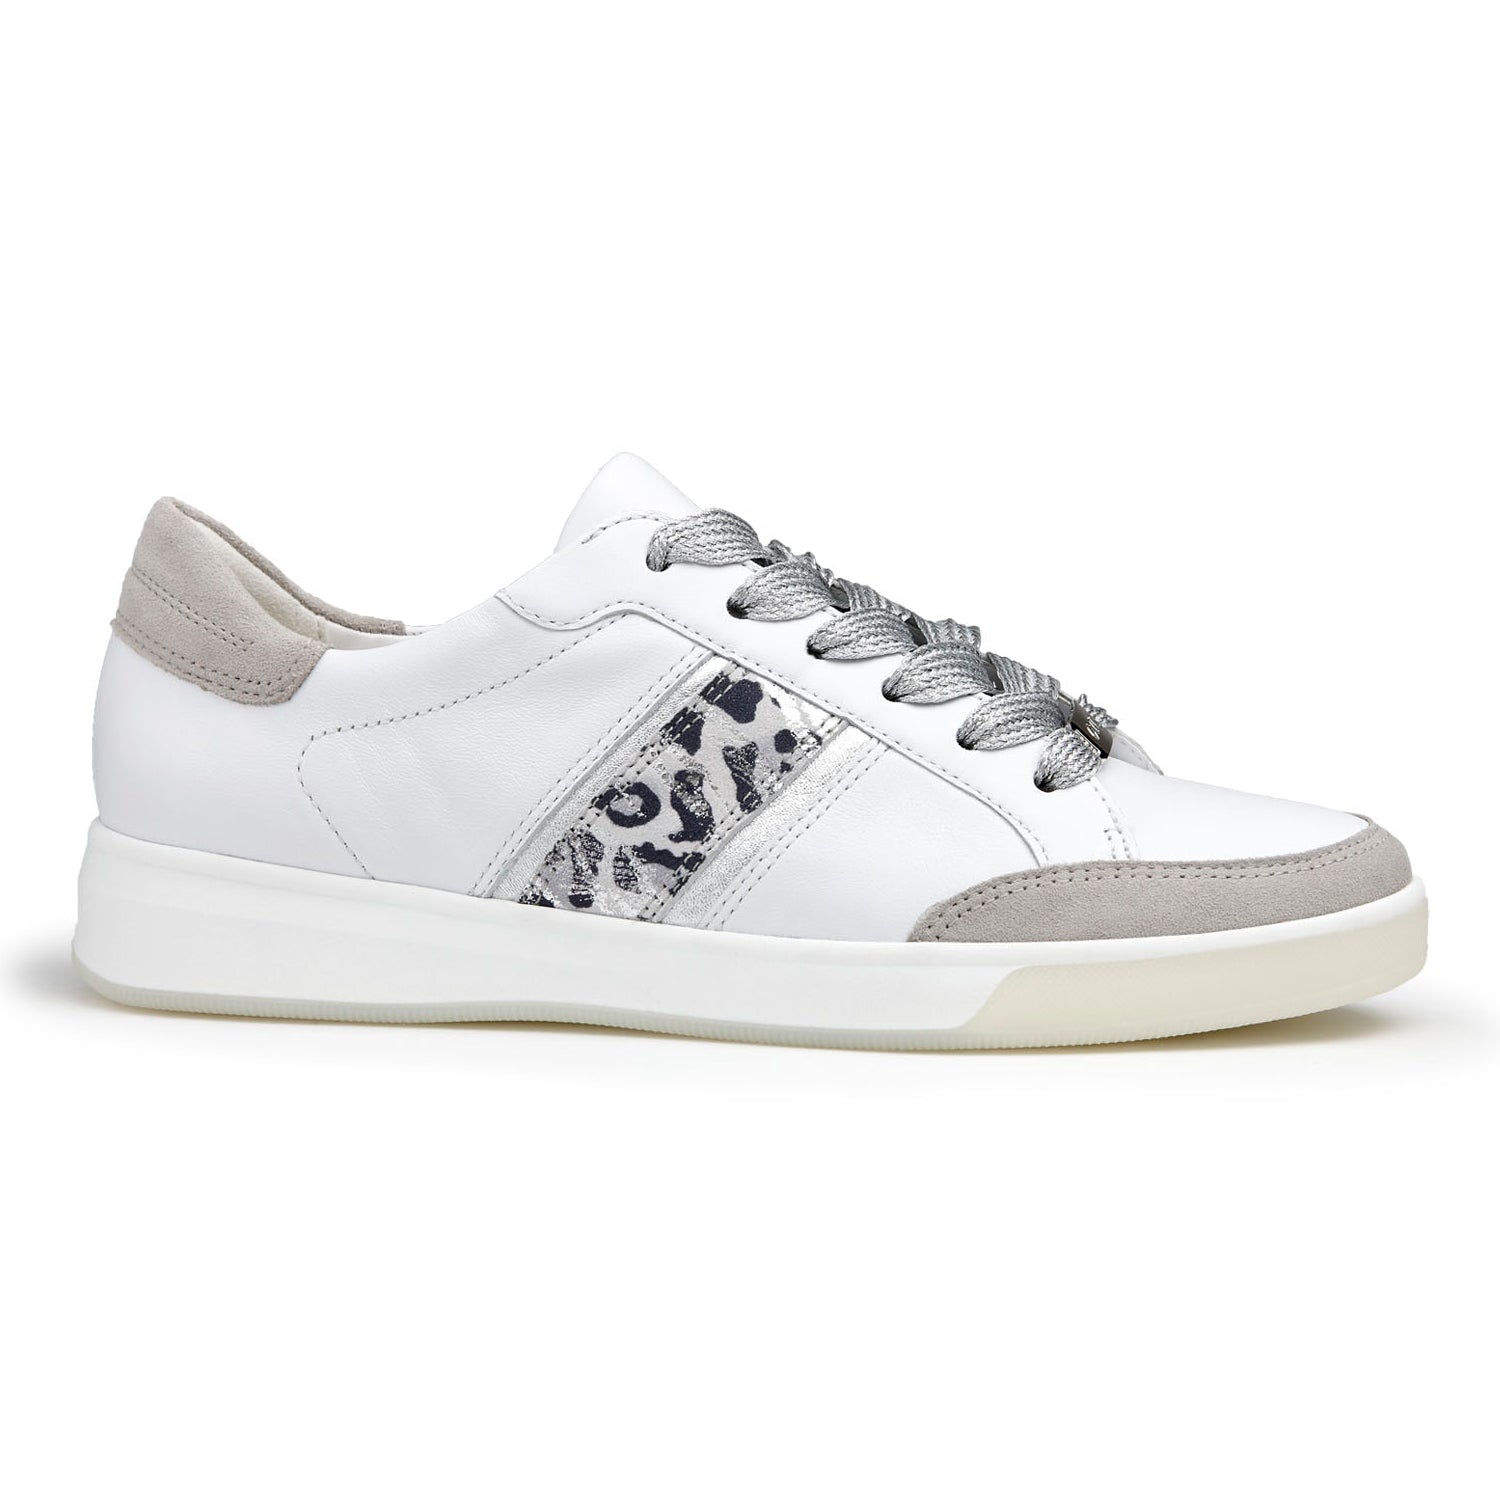 rouw resultaat Citroen Ara Rom-High Soft White Silver Sneakers | Free Shipping – Bstore